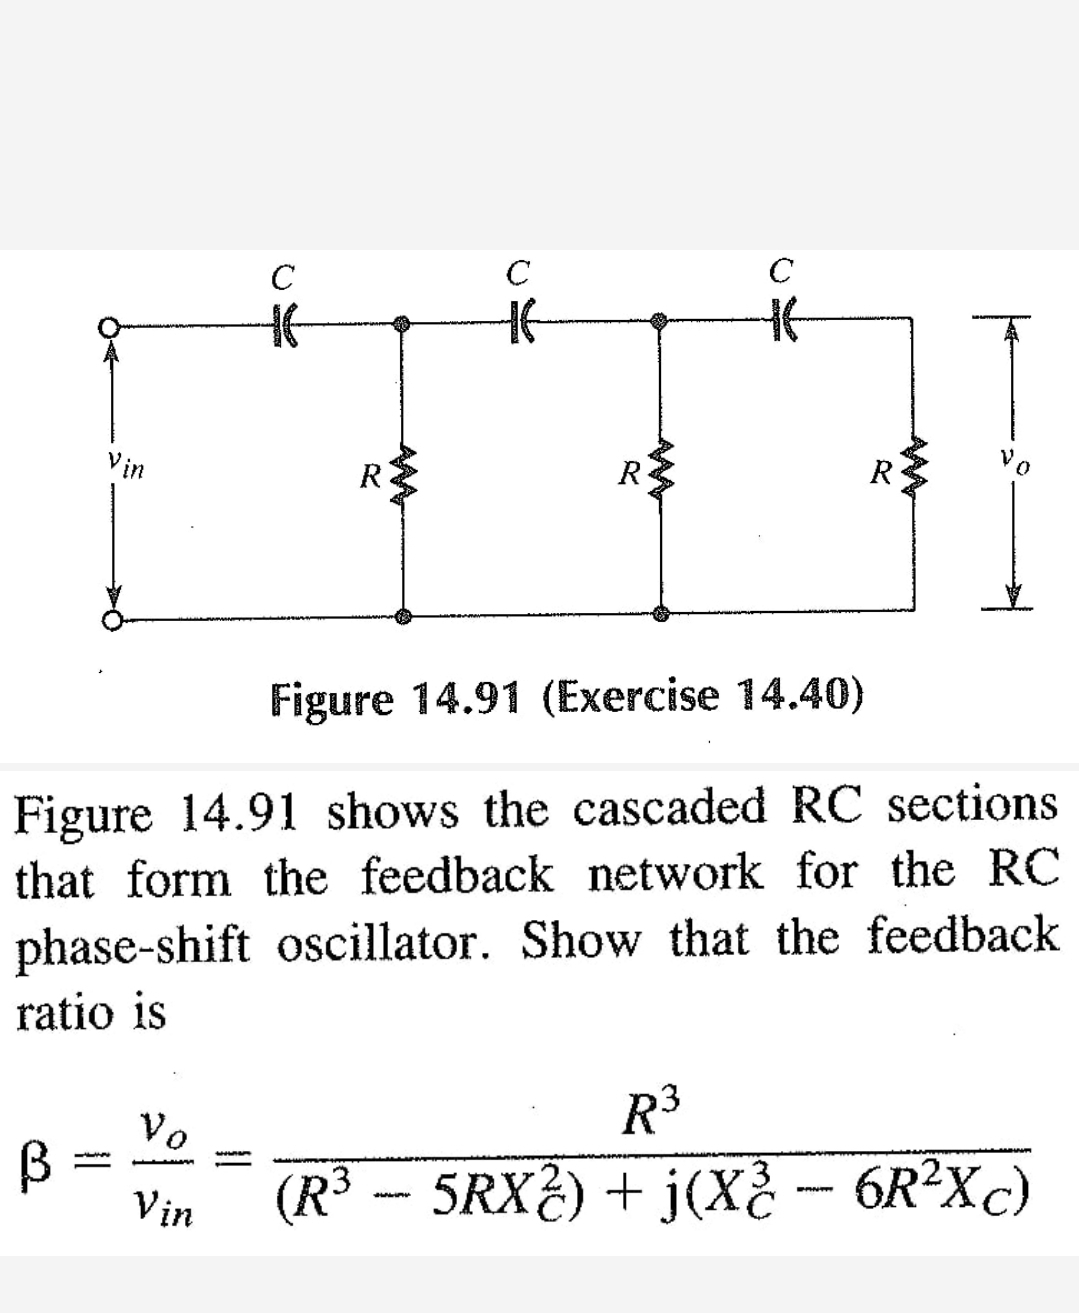 В
Vin
-w
Vo
Figure 14.91 (Exercise 14.40)
Figure 14.91 shows the cascaded RC sections
that form the feedback network for the RC
phase-shift oscillator. Show that the feedback
ratio is
Vin
с
www.m
R
с
с
HE
R³
(R³ -- 5RX²) + j(X² – 6R²Xc)